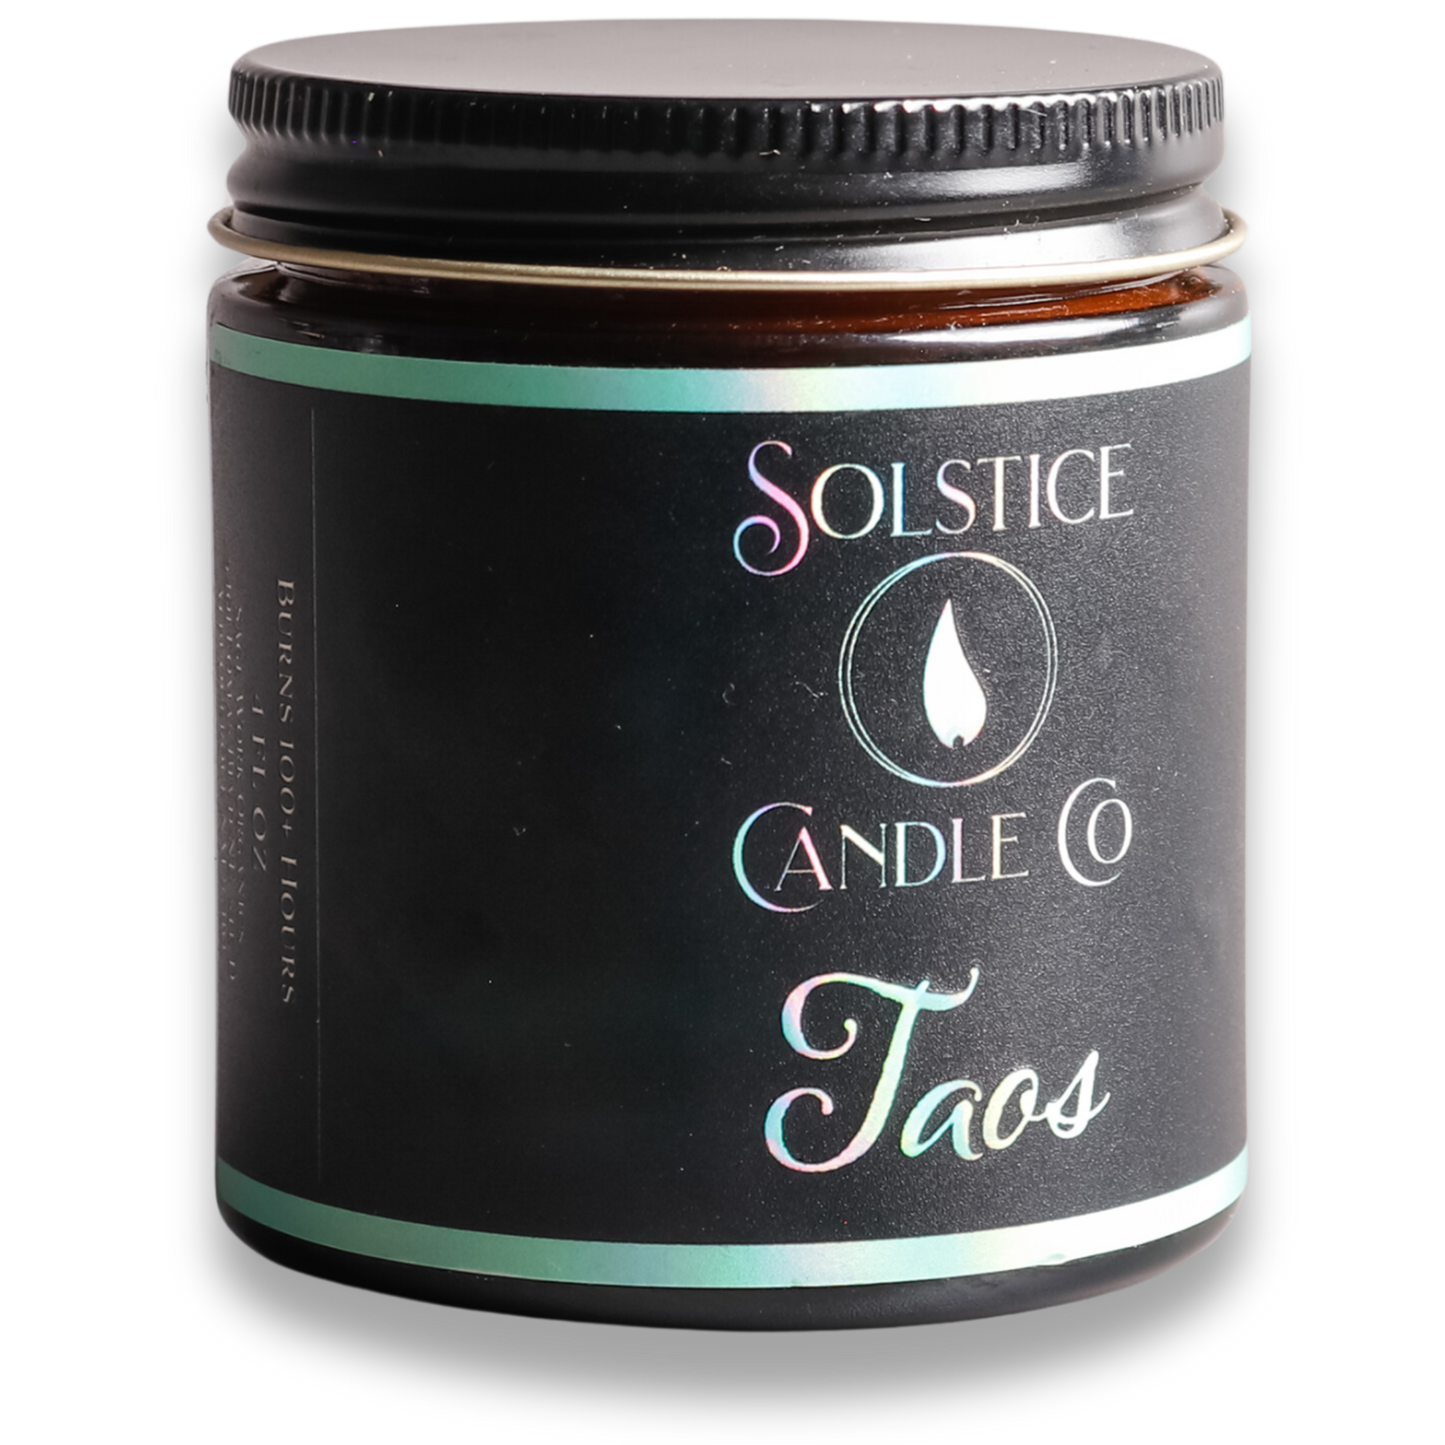 Taos Candle